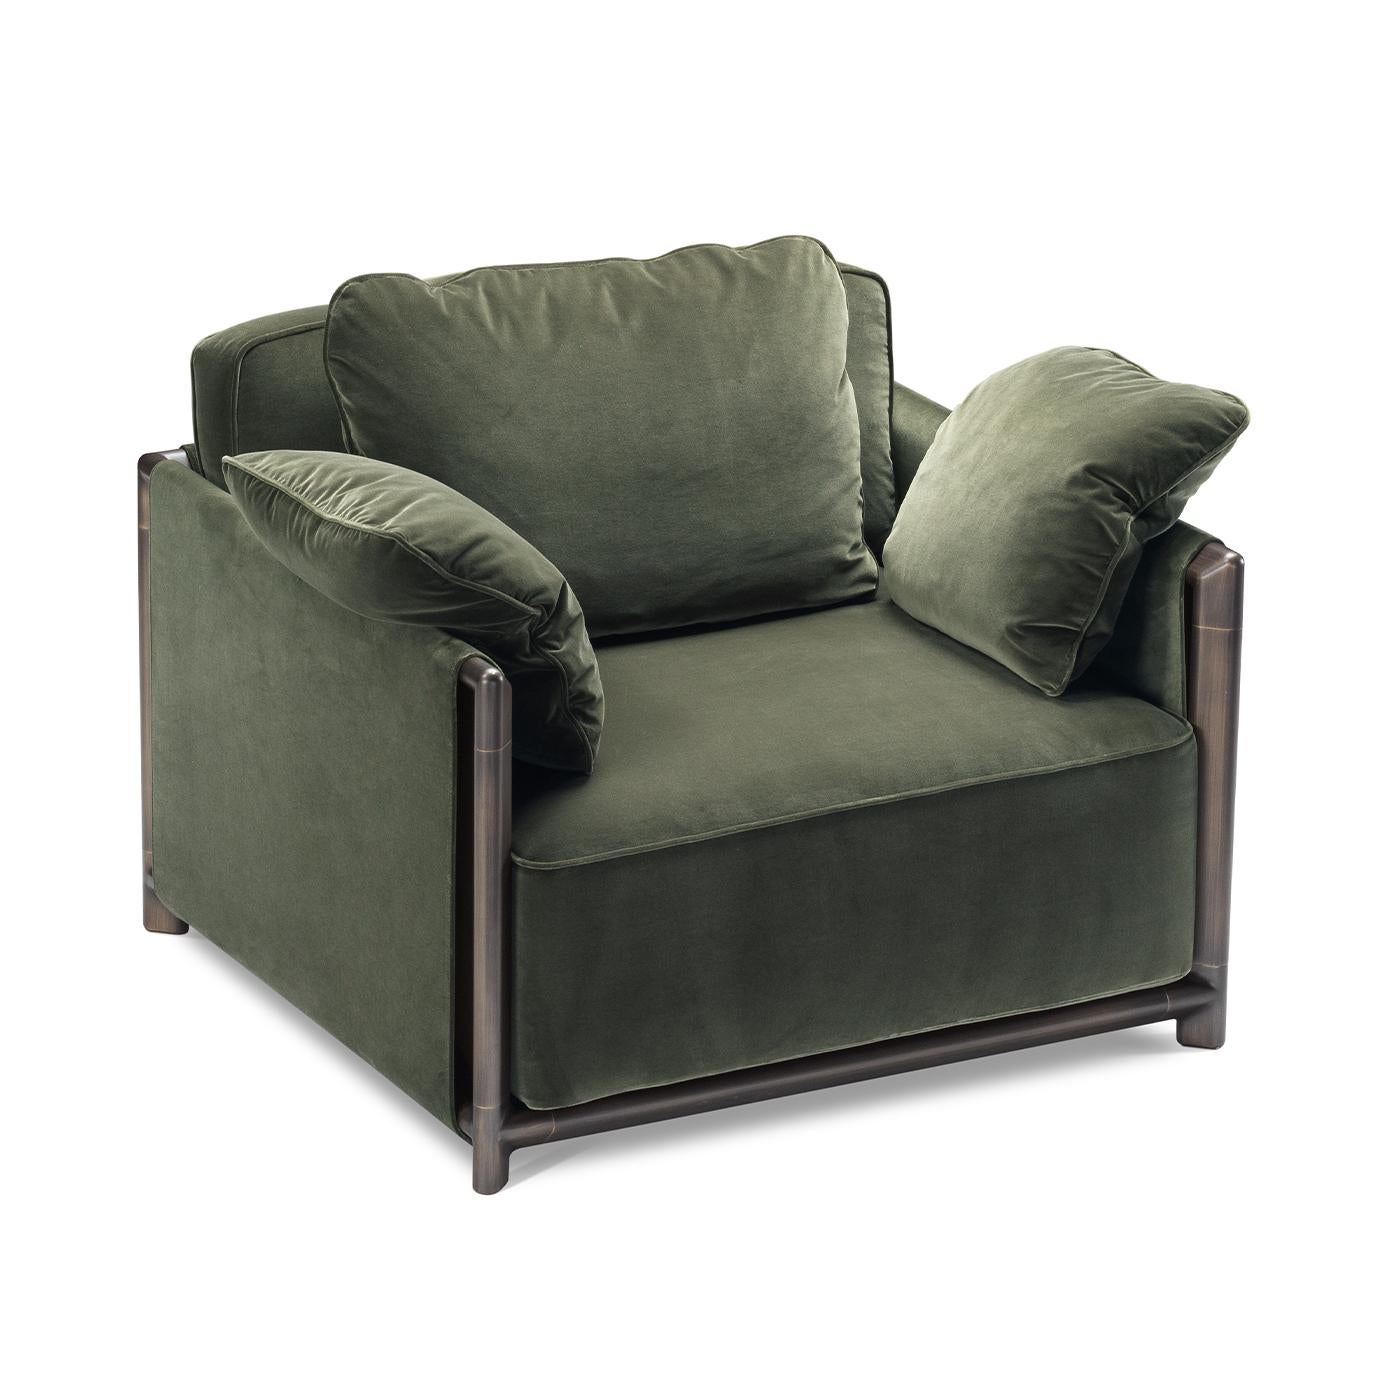 Ideal to be paired with its sofa counterpart for a cohesive look, this armchair couples neat lines to generous volumes to provide excellent comfort without renouncing sober elegance, Fluffy cushions covered in soft, green fabric comprise the seat,